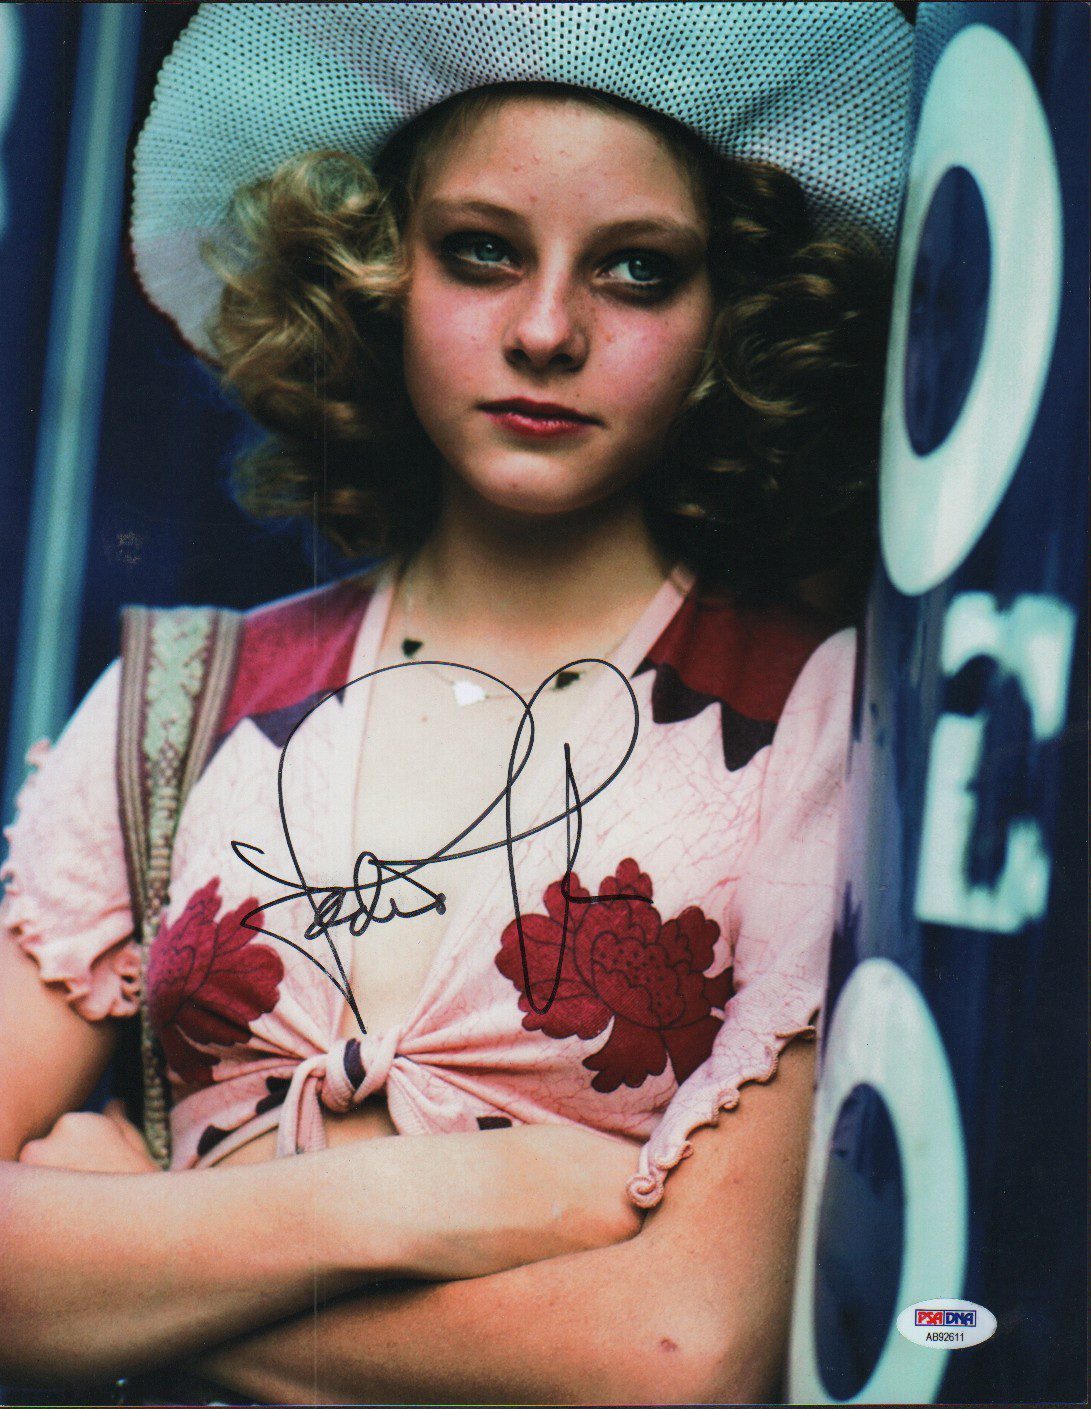 Jodie Foster Autograph for Sale